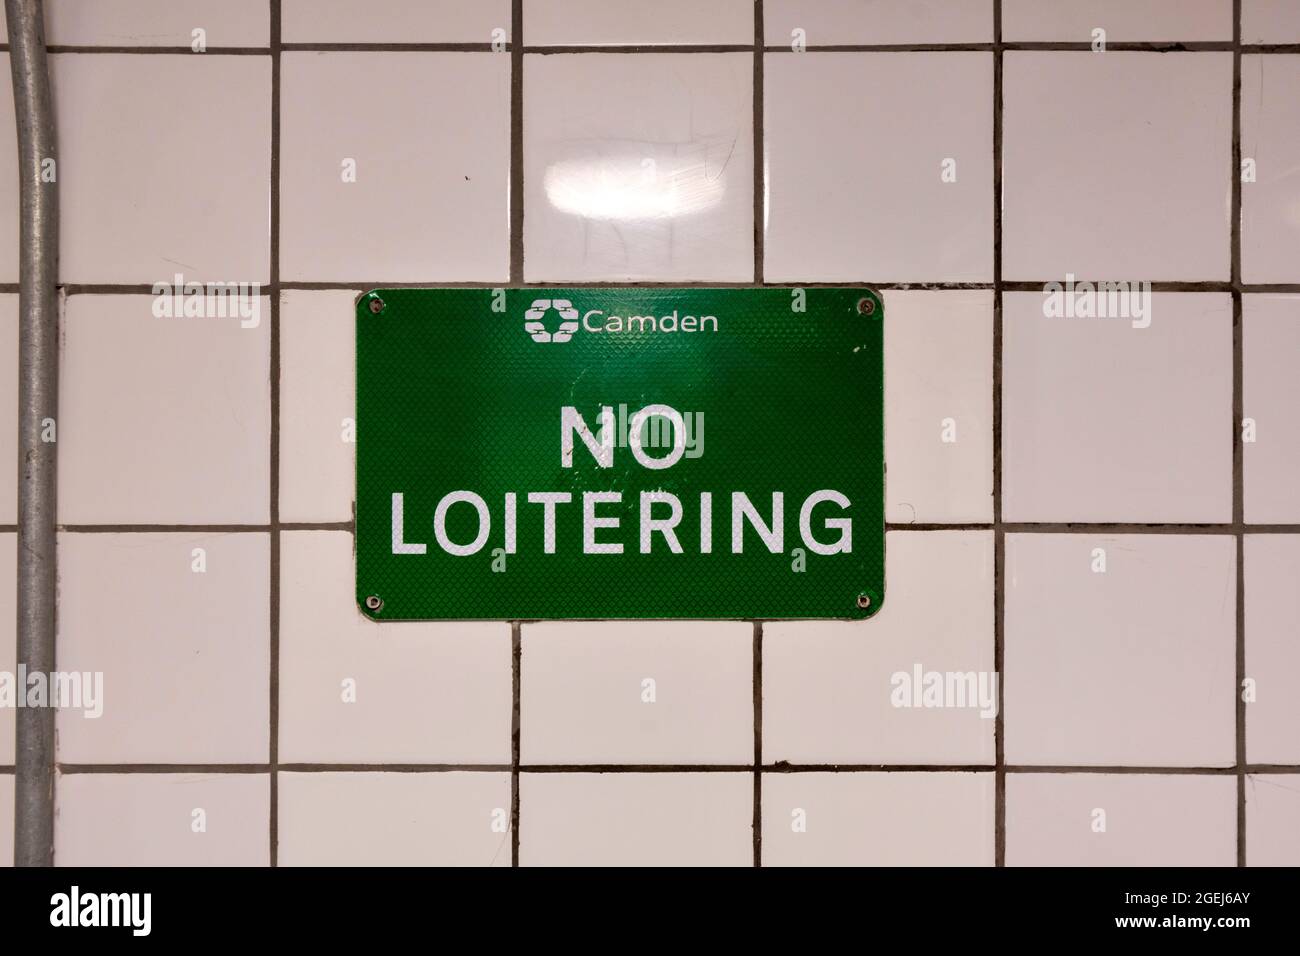 LONDON LINCOLN'S INN FIELDS CAMDEN THE GENTS TOILETS A NO LOITERING SIGN Stock Photo